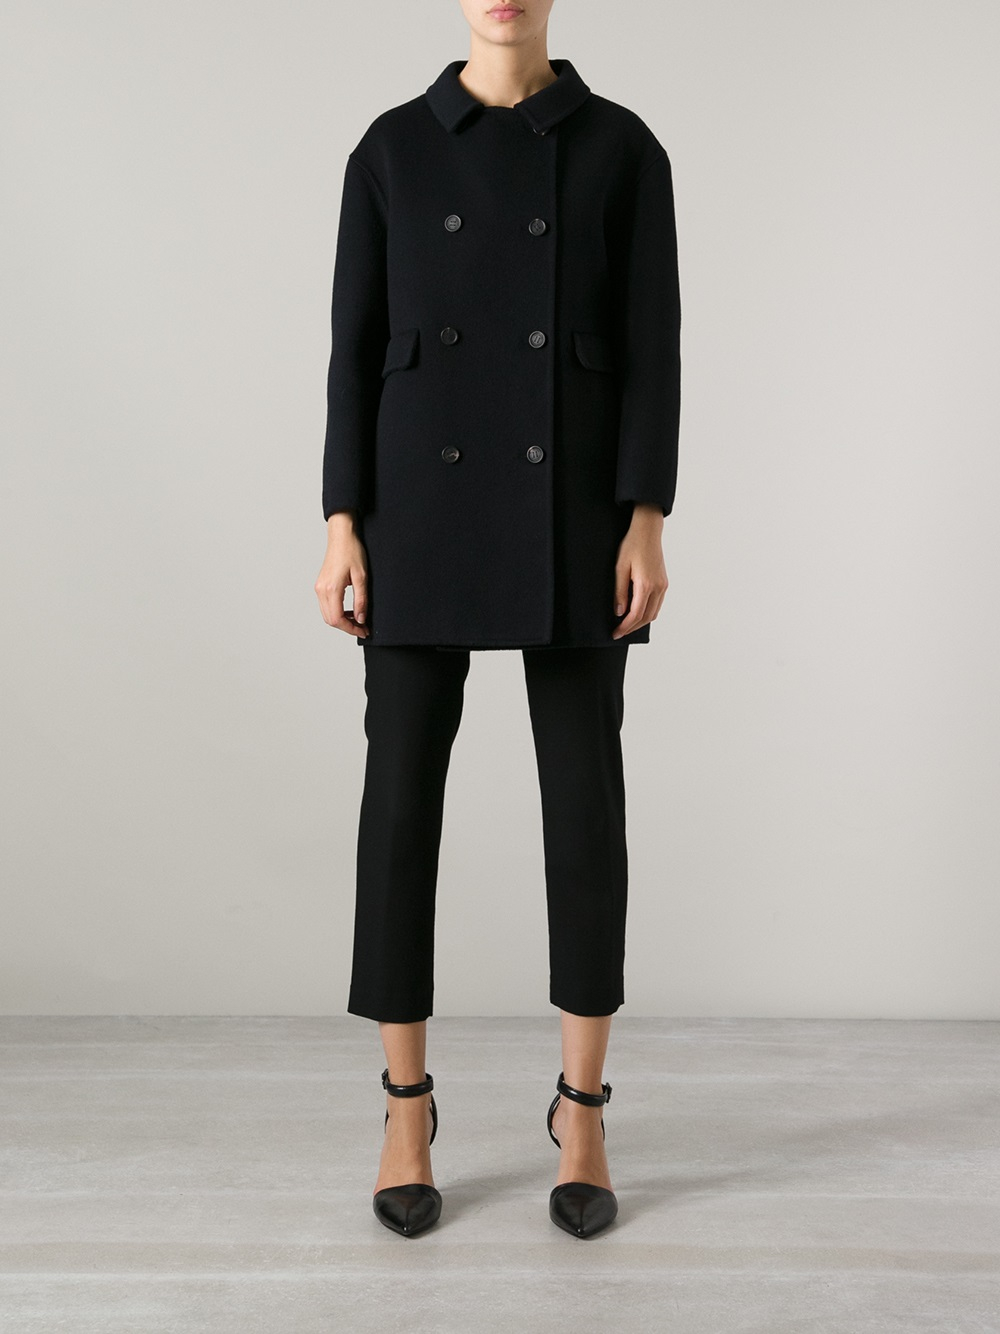 Lyst - Sofie D'Hoore Double-breasted Coat in Black